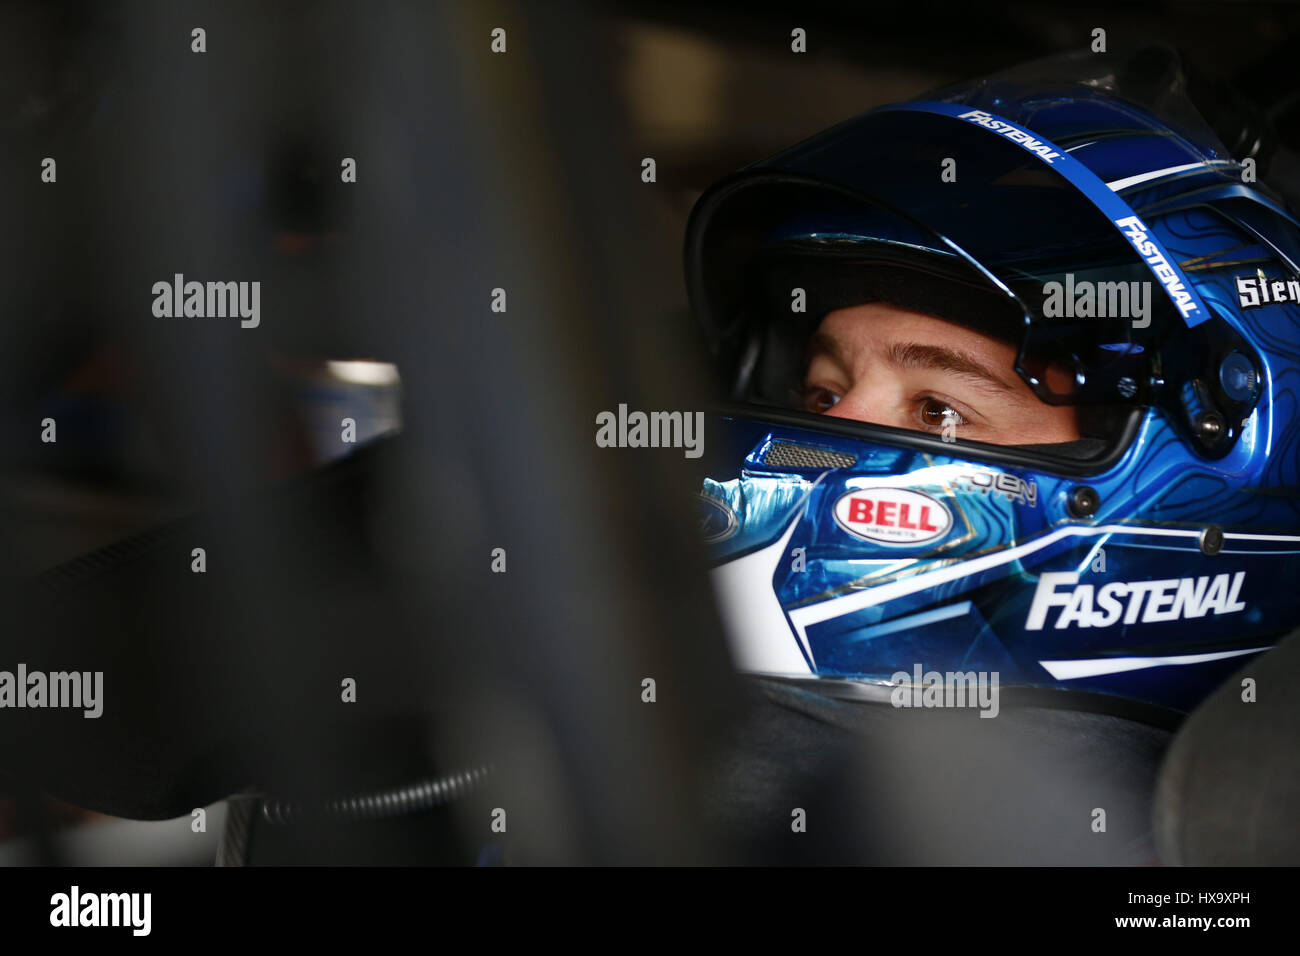 Fontana, California, USA. 25th Mar, 2017. March 25, 2017 - Fontana, California, USA: Ricky Stenhouse Jr. (17) hangs out in the garage during practice for the Auto Club 400 at Auto Club Speedway in Fontana, California. Credit: Jusitn R. Noe Asp Inc/ASP/ZUMA Wire/Alamy Live News Stock Photo